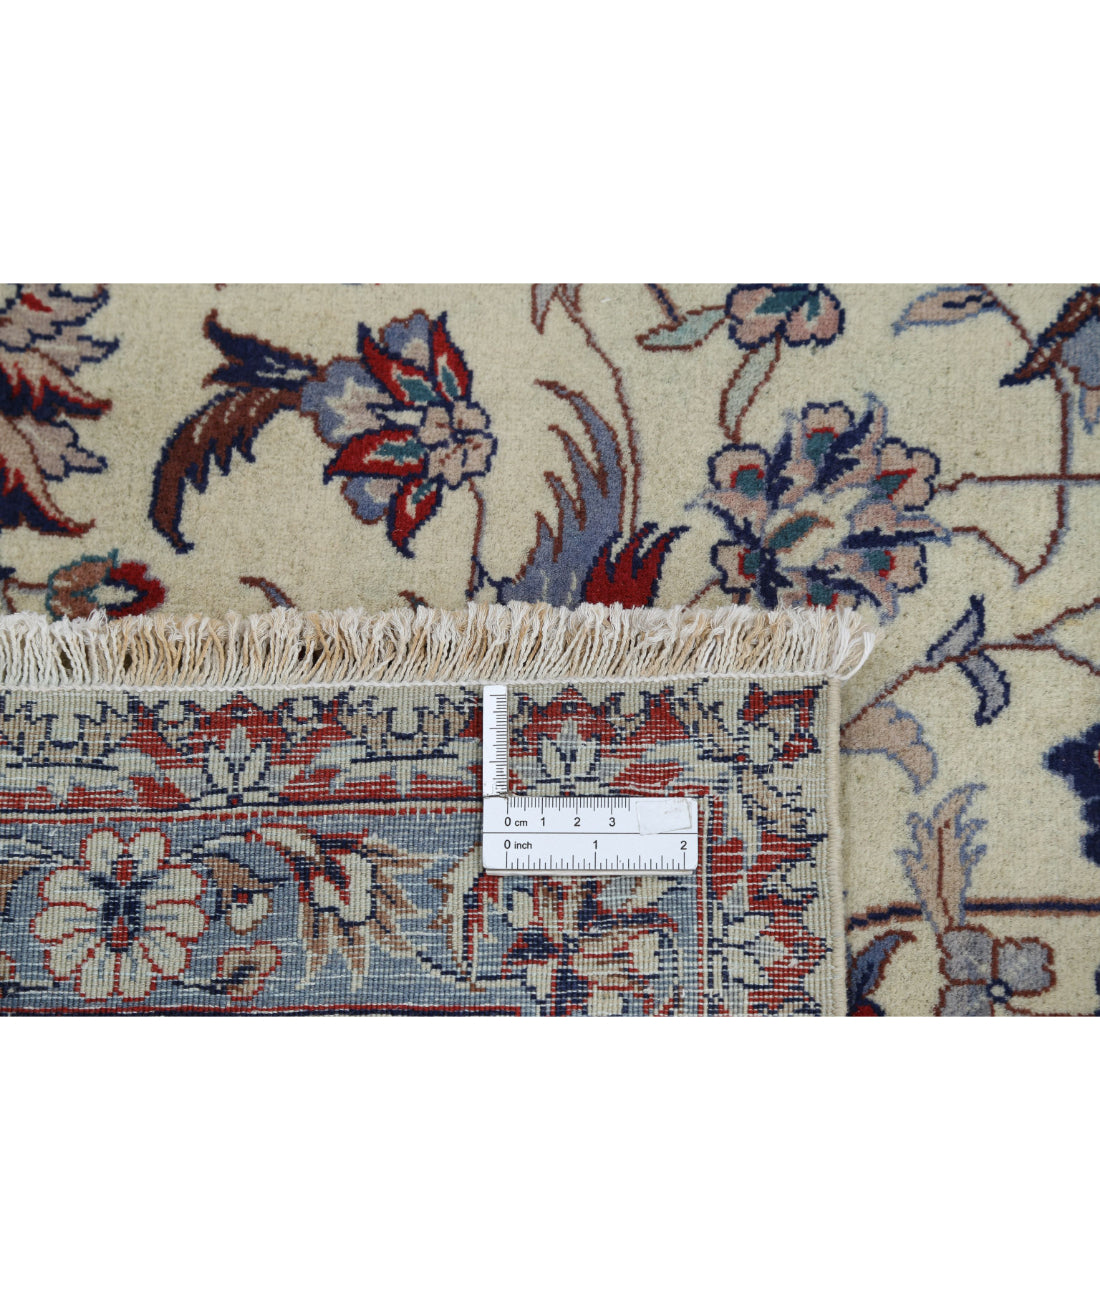 Hand Knotted Heritage Fine Persian Style Wool Rug - 8'4'' x 9'11'' 8'4'' x 9'11'' (250 X 298) / Ivory / Red